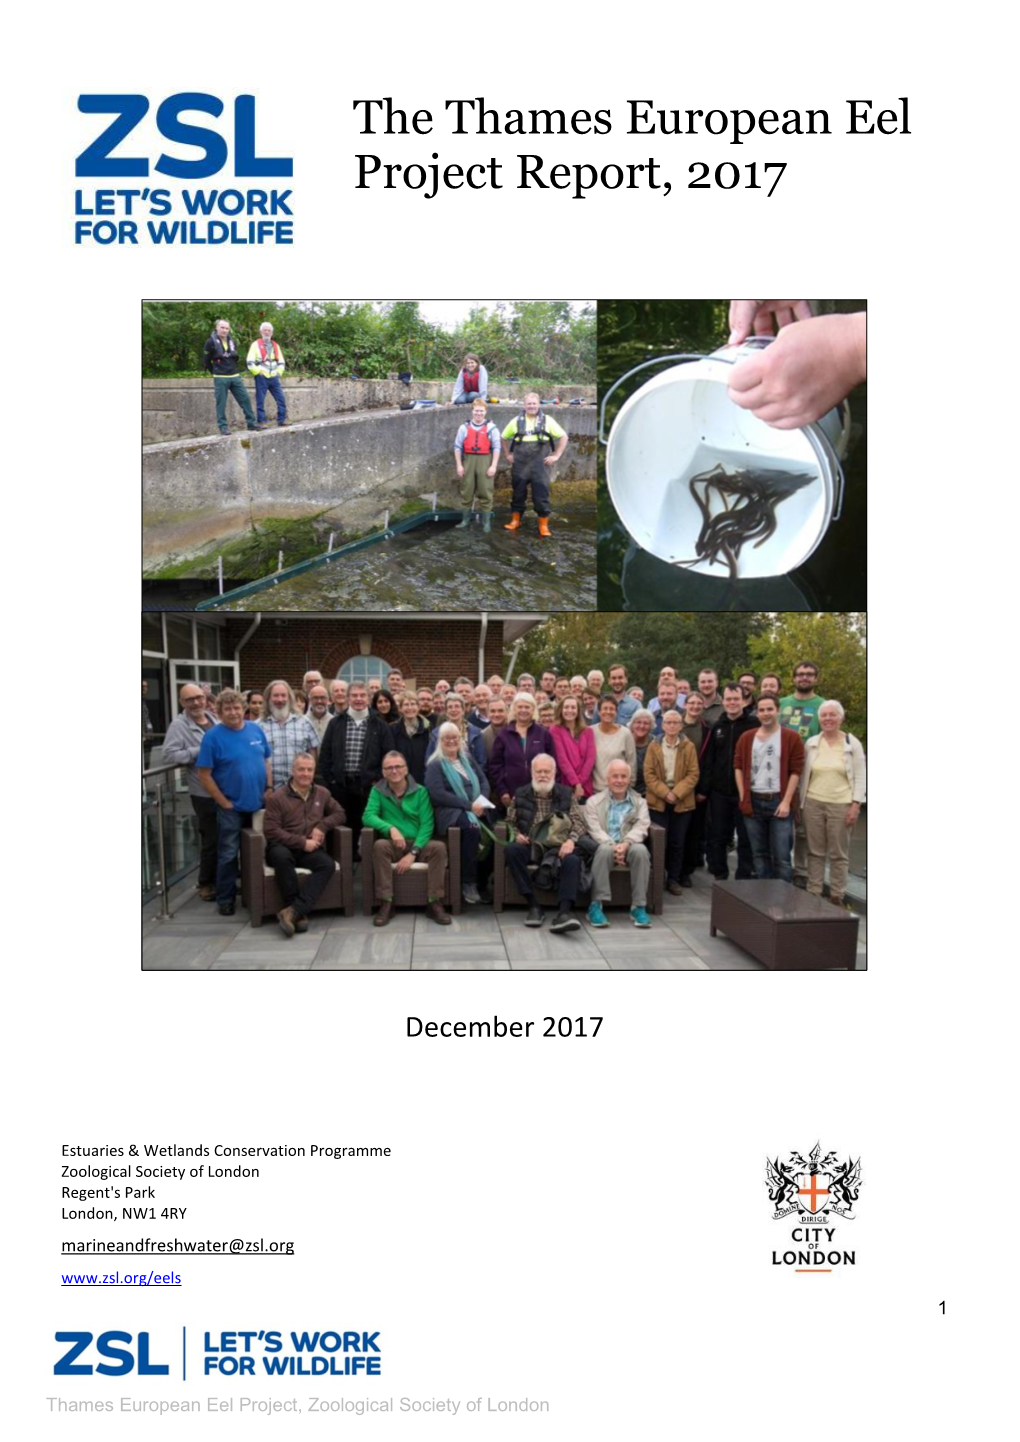 The Thames European Eel Project Report, 2017